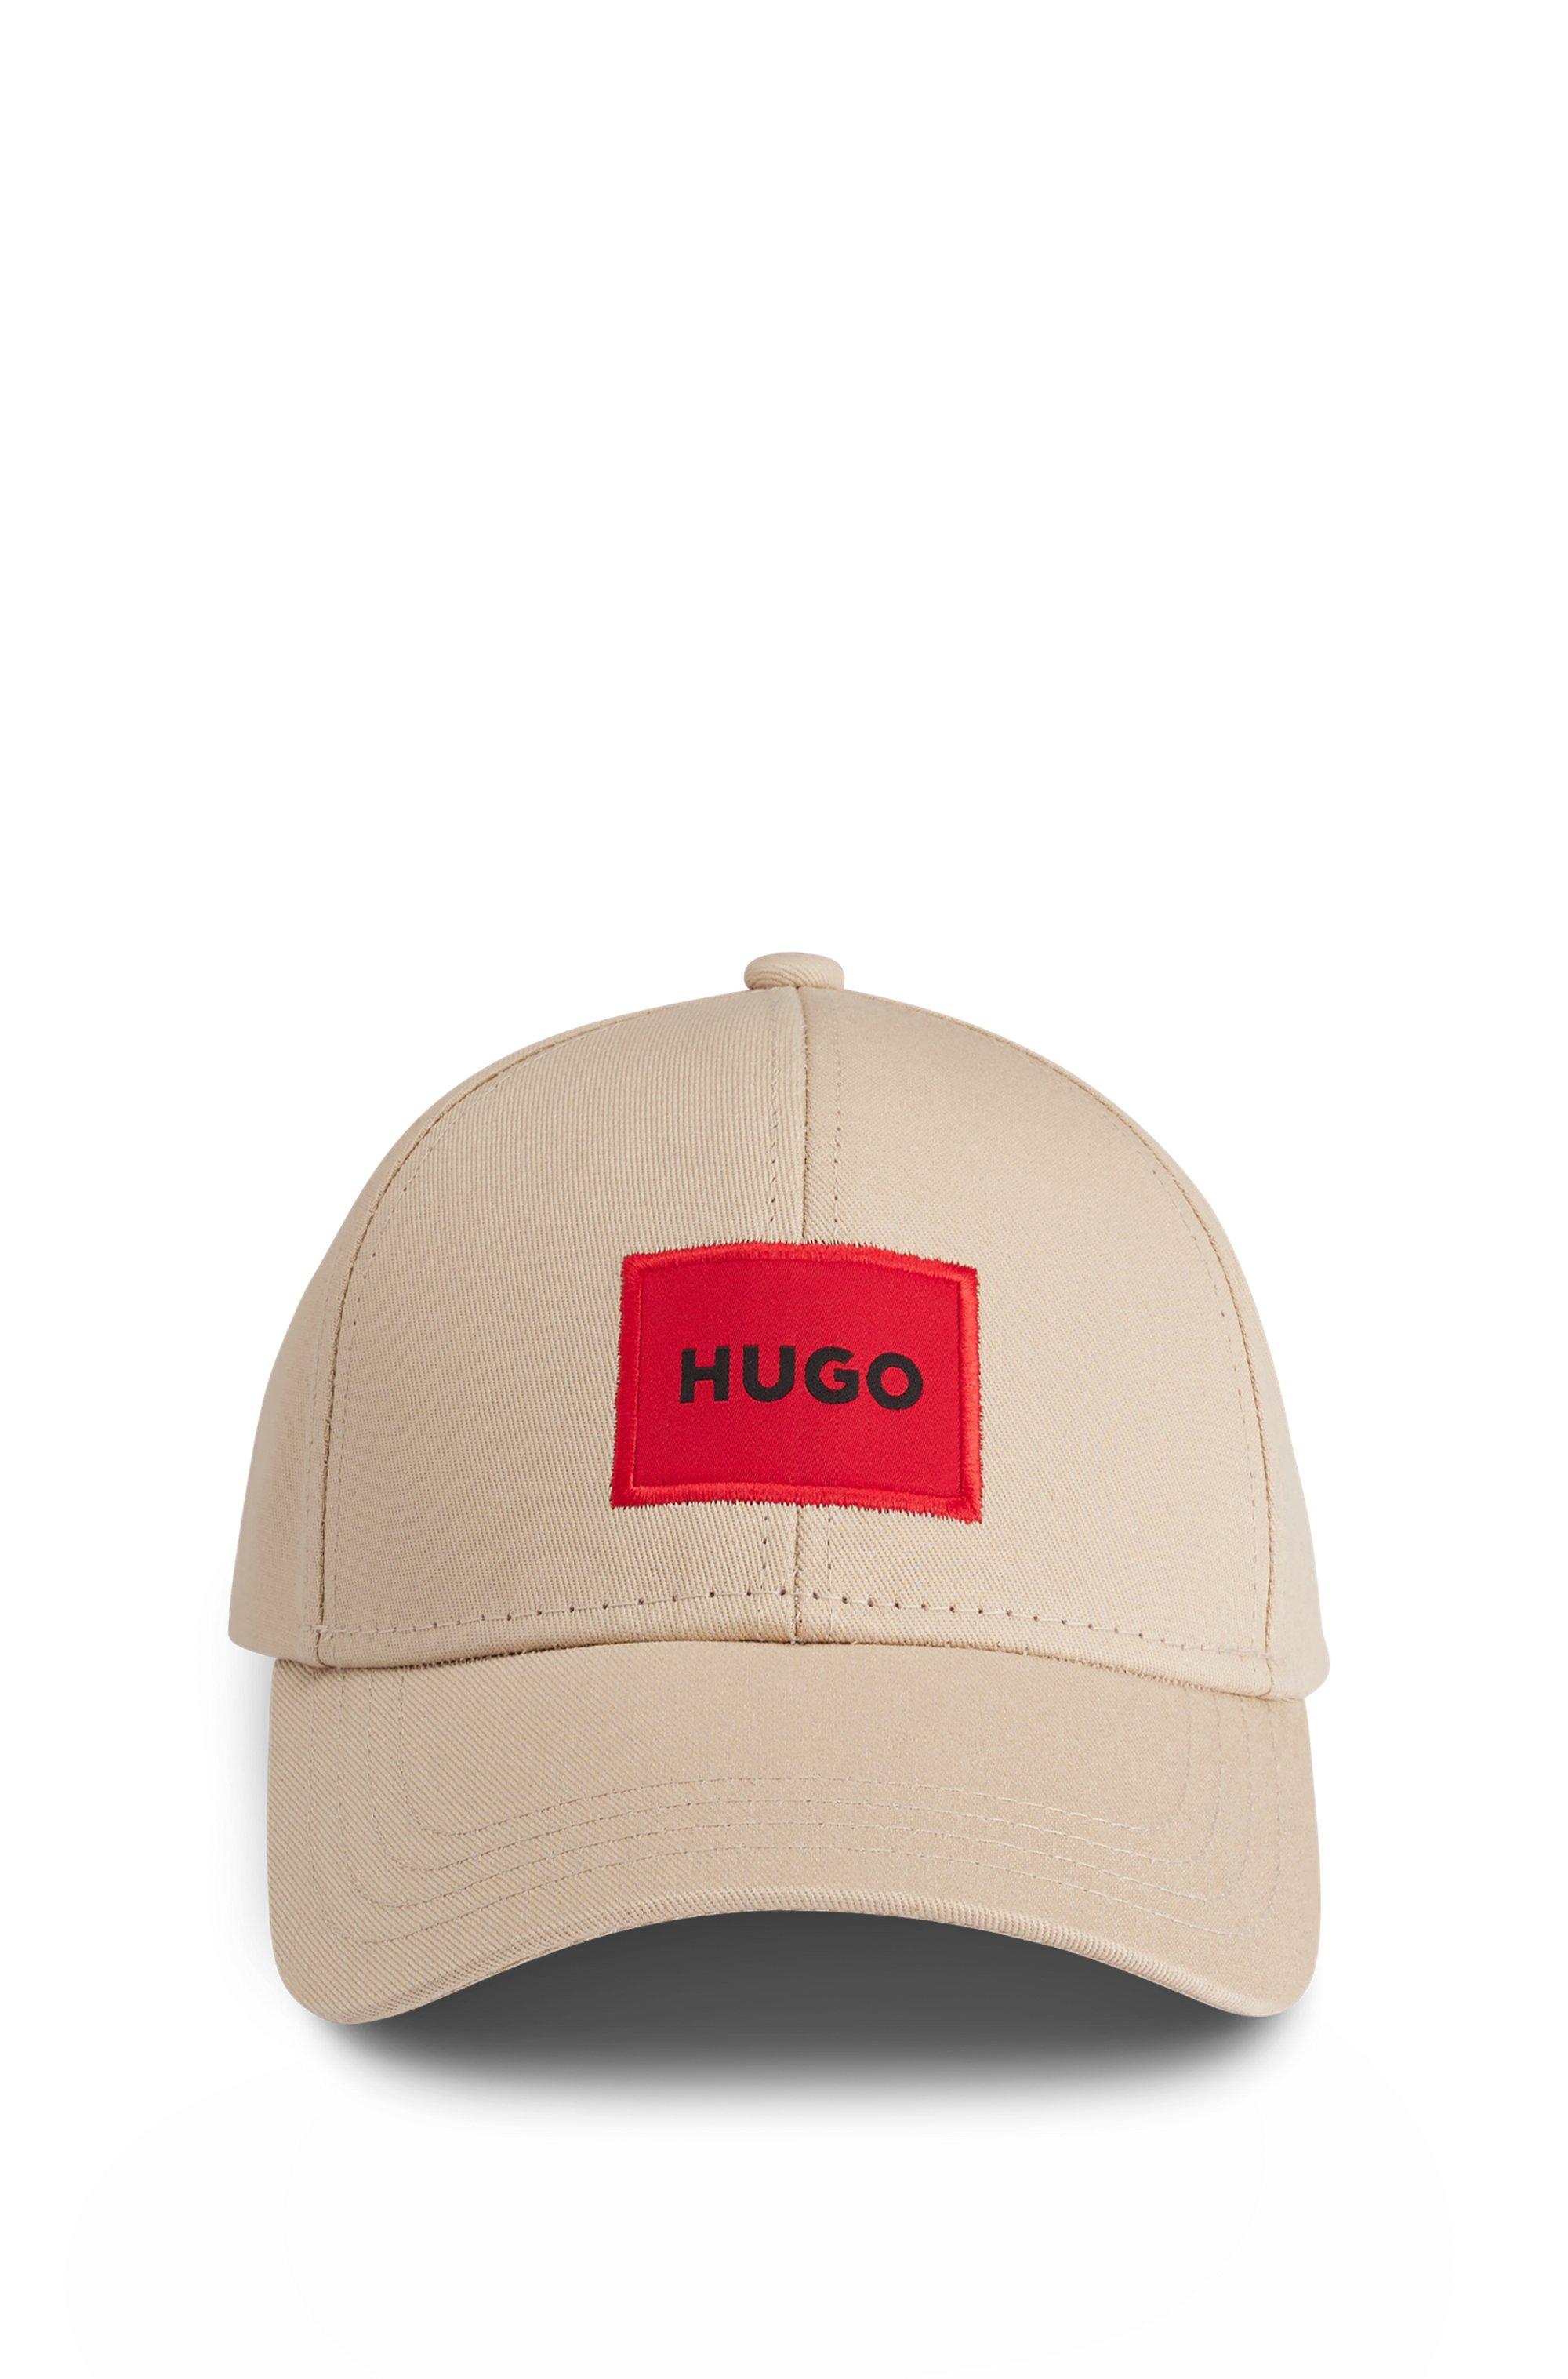 With Cotton-twill by Men in Pink Cap HUGO Lyst BOSS BOSS for Logo Red Label |